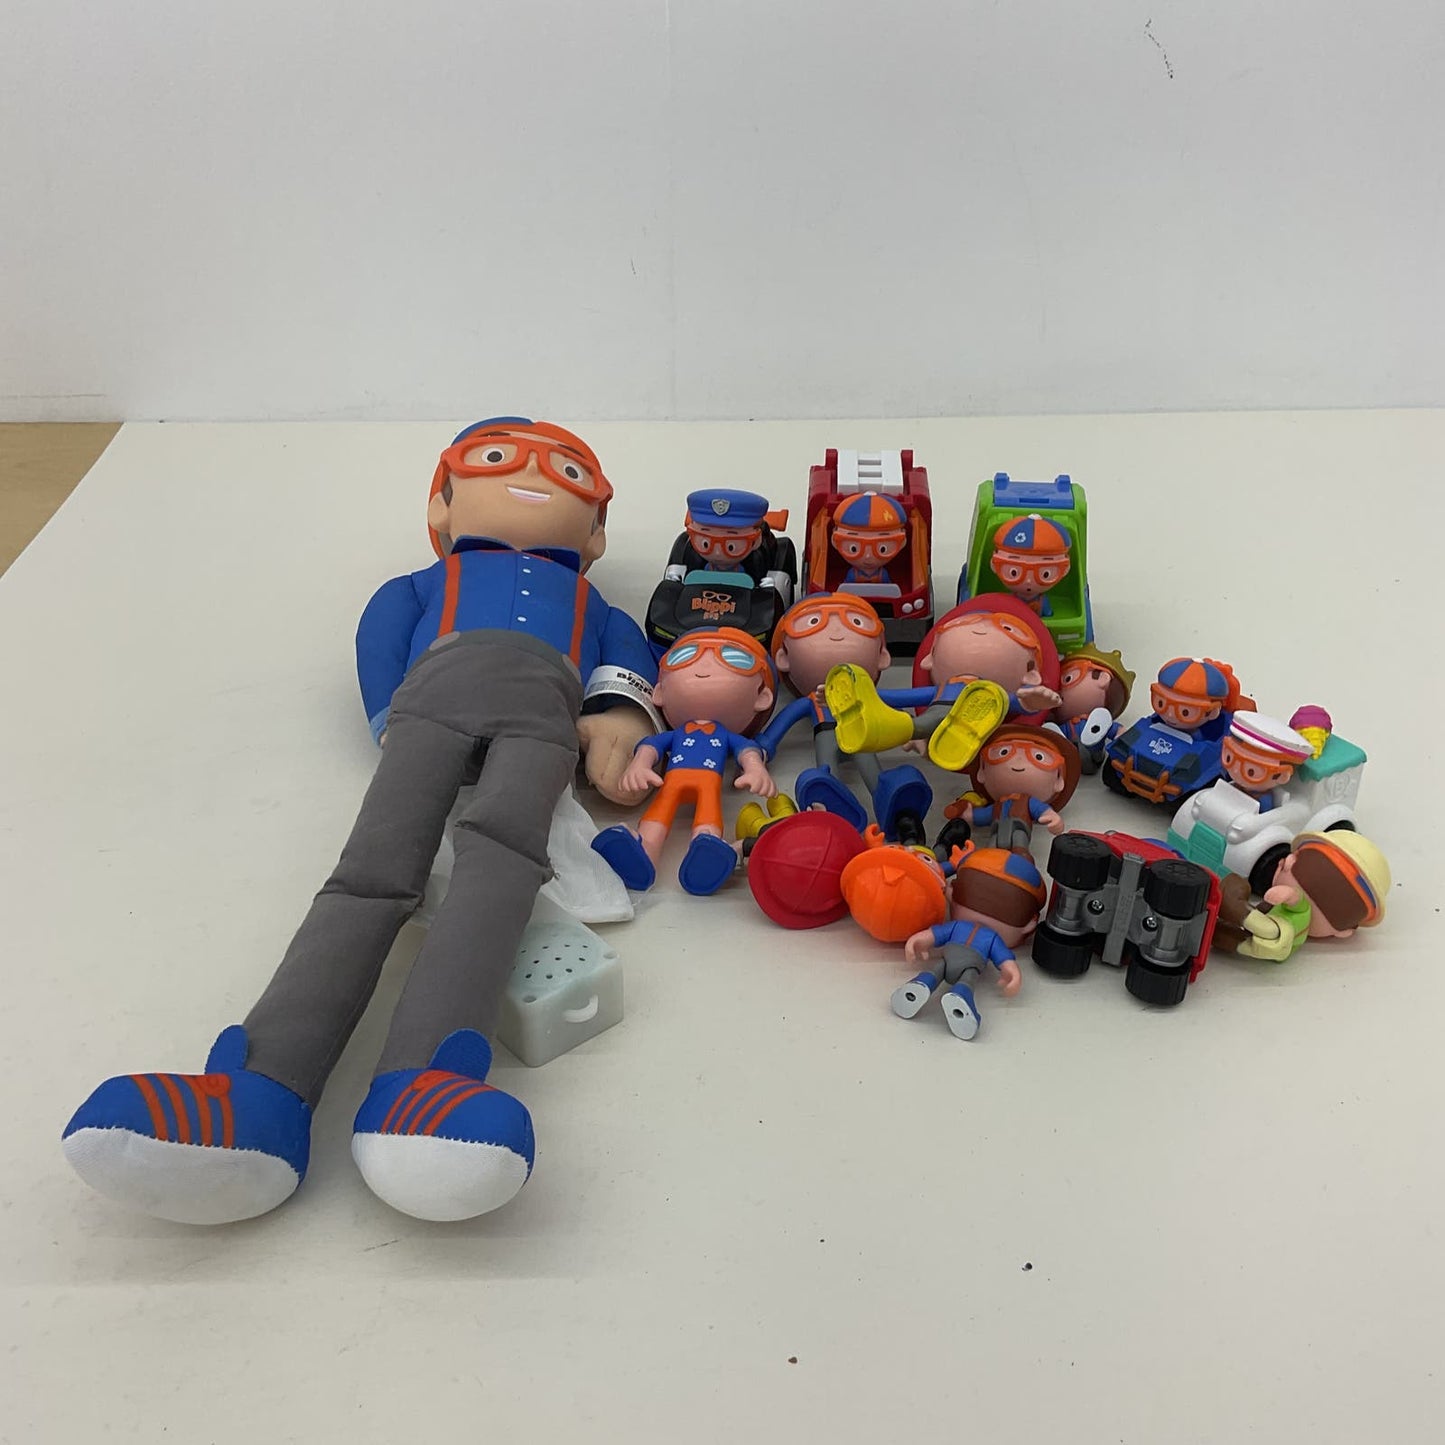 Preowned Blippi Toy Figures Cake Toppers Vehicles Cars Plush Doll Mixed Used LOT - Warehouse Toys